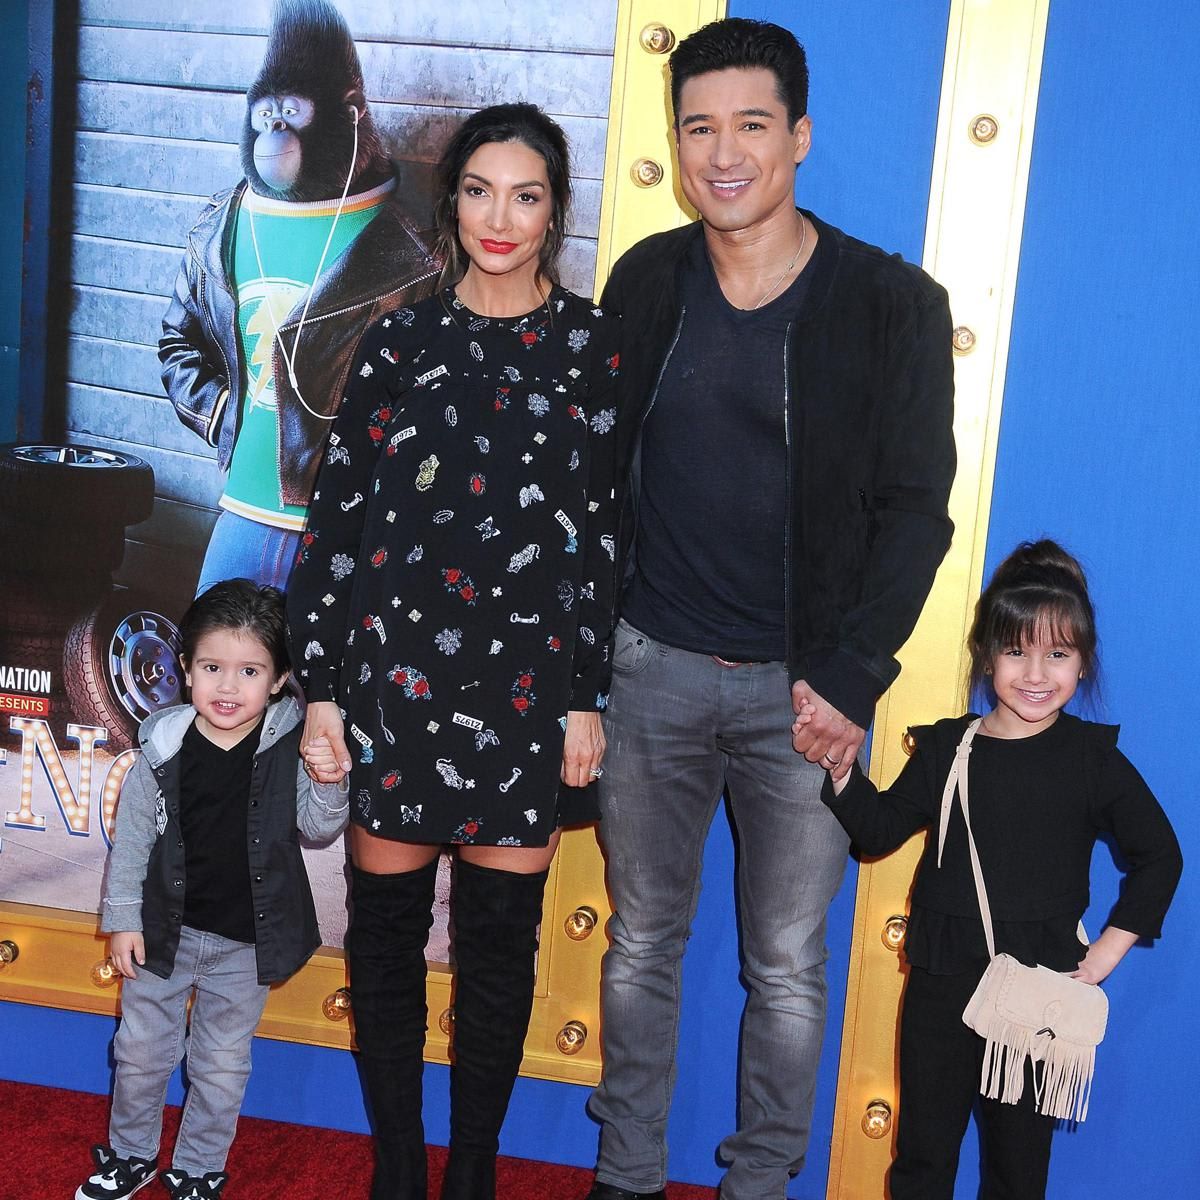 Premiere Of Universal Pictures' "Sing" - Arrivals